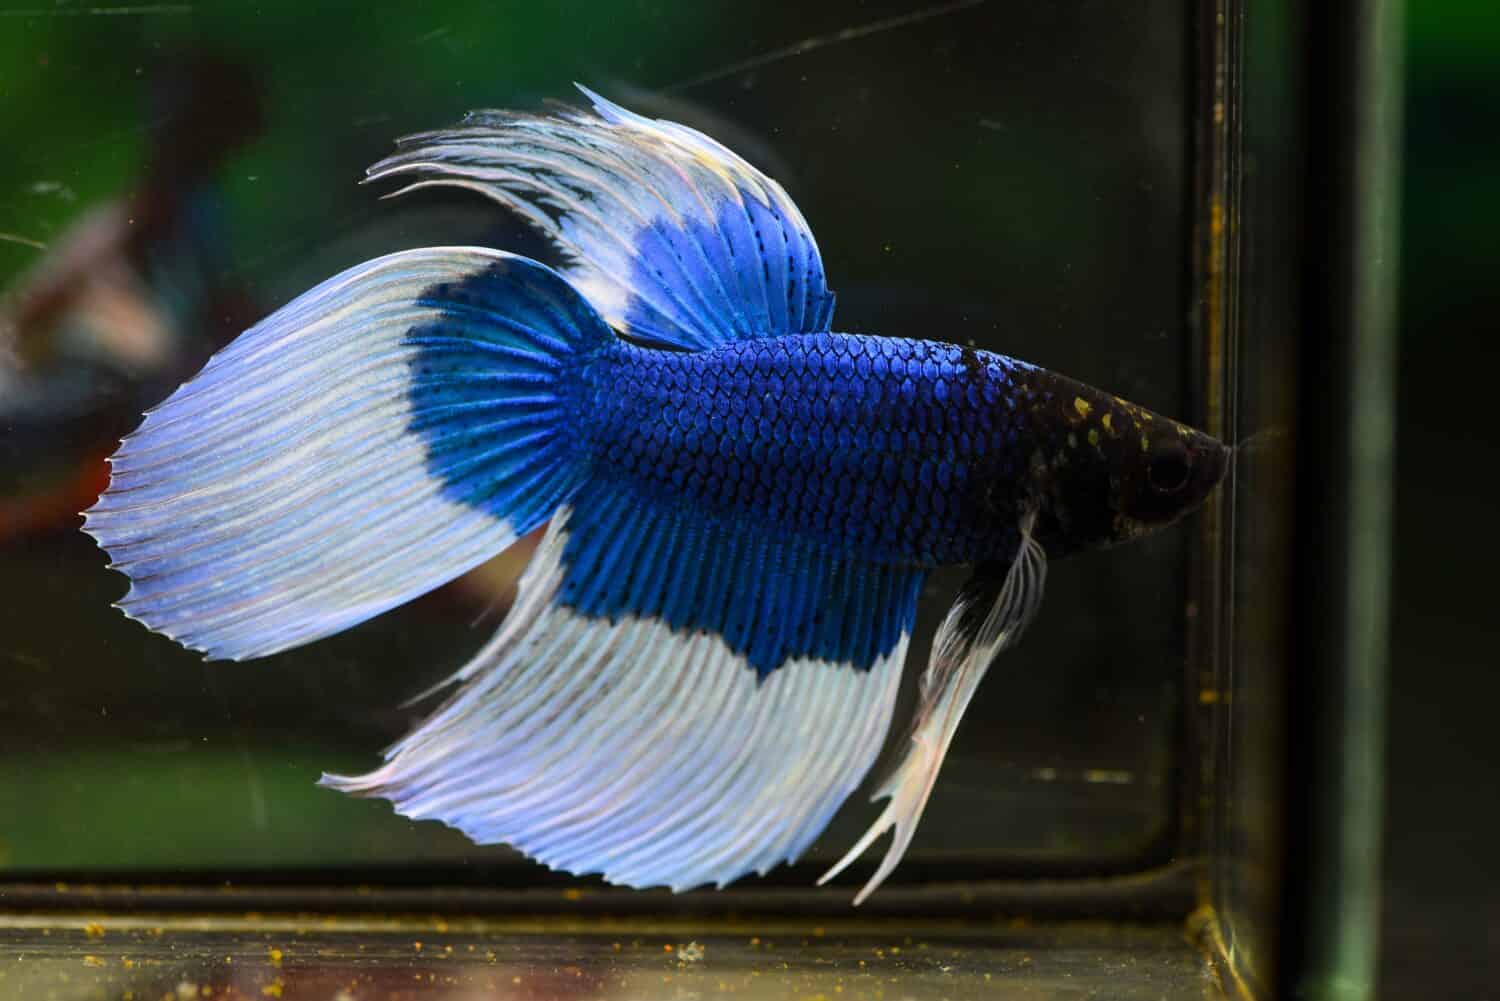 Blue Butterfly VTM STMColorful Betta fish .Swimming under water in clear glass tank aquarium, free movement isolated on green background ,3.5 months old age, Popular aquarium fish hobby,